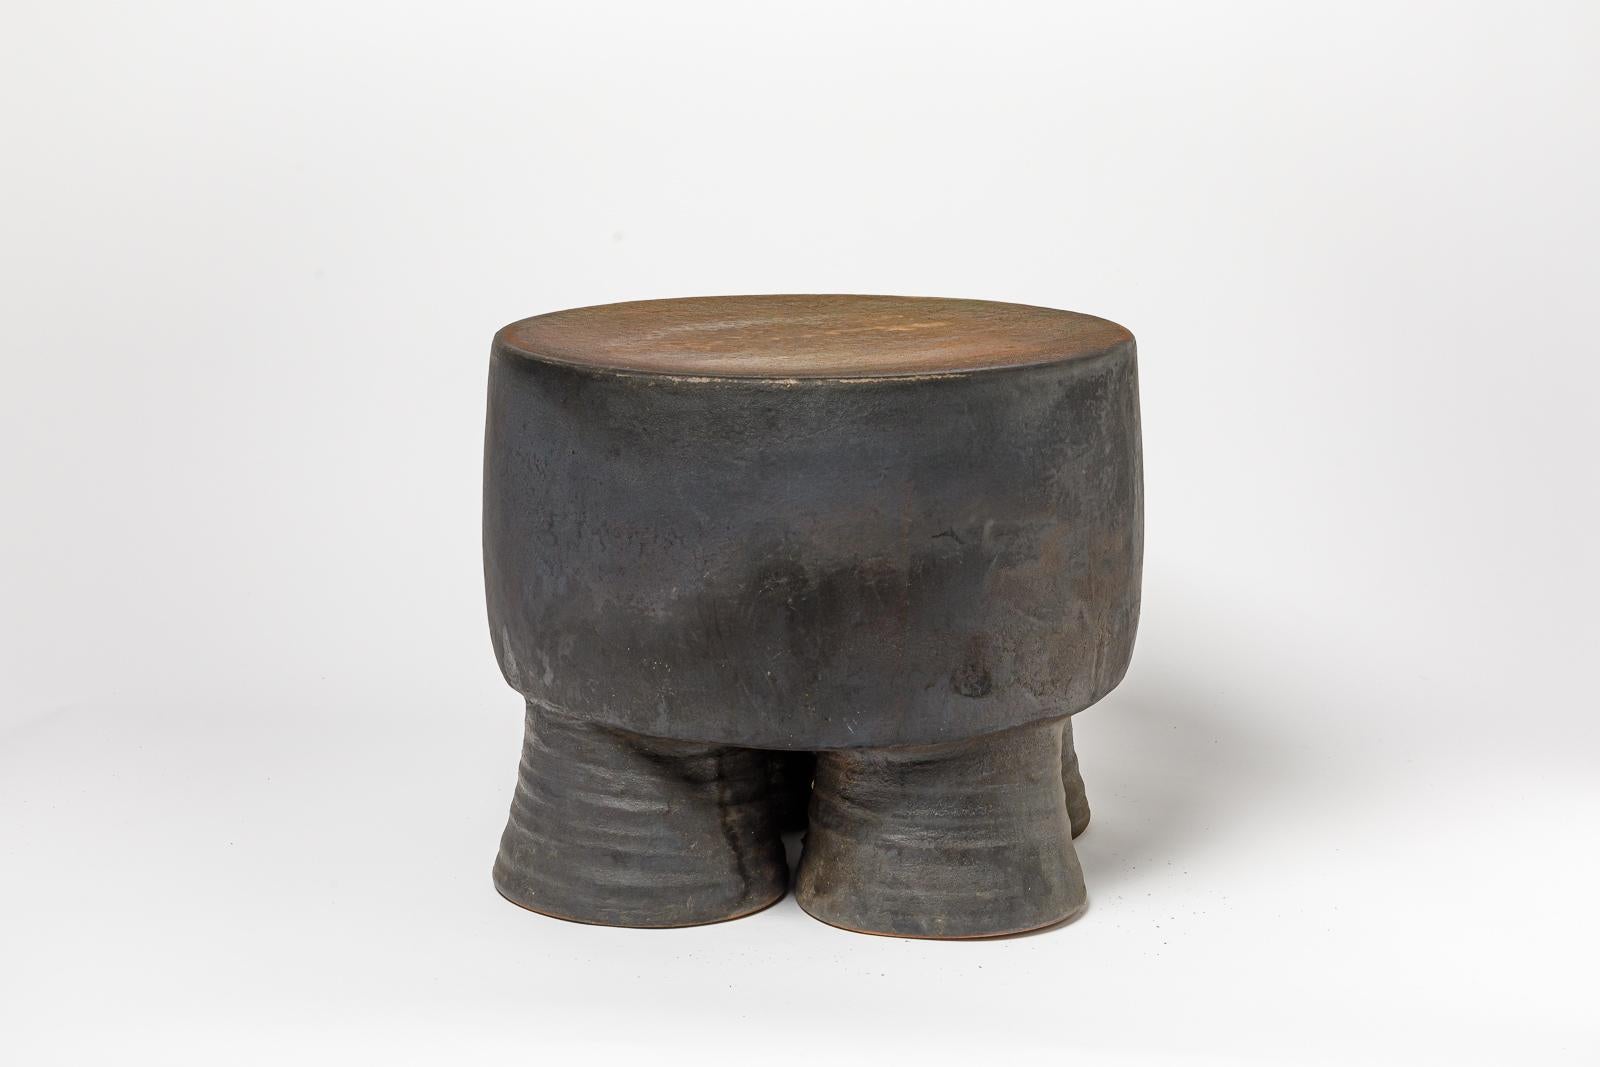 Beaux Arts Black and ocher glazed ceramic stool or coffee table by Mia Jensen, 2023. For Sale